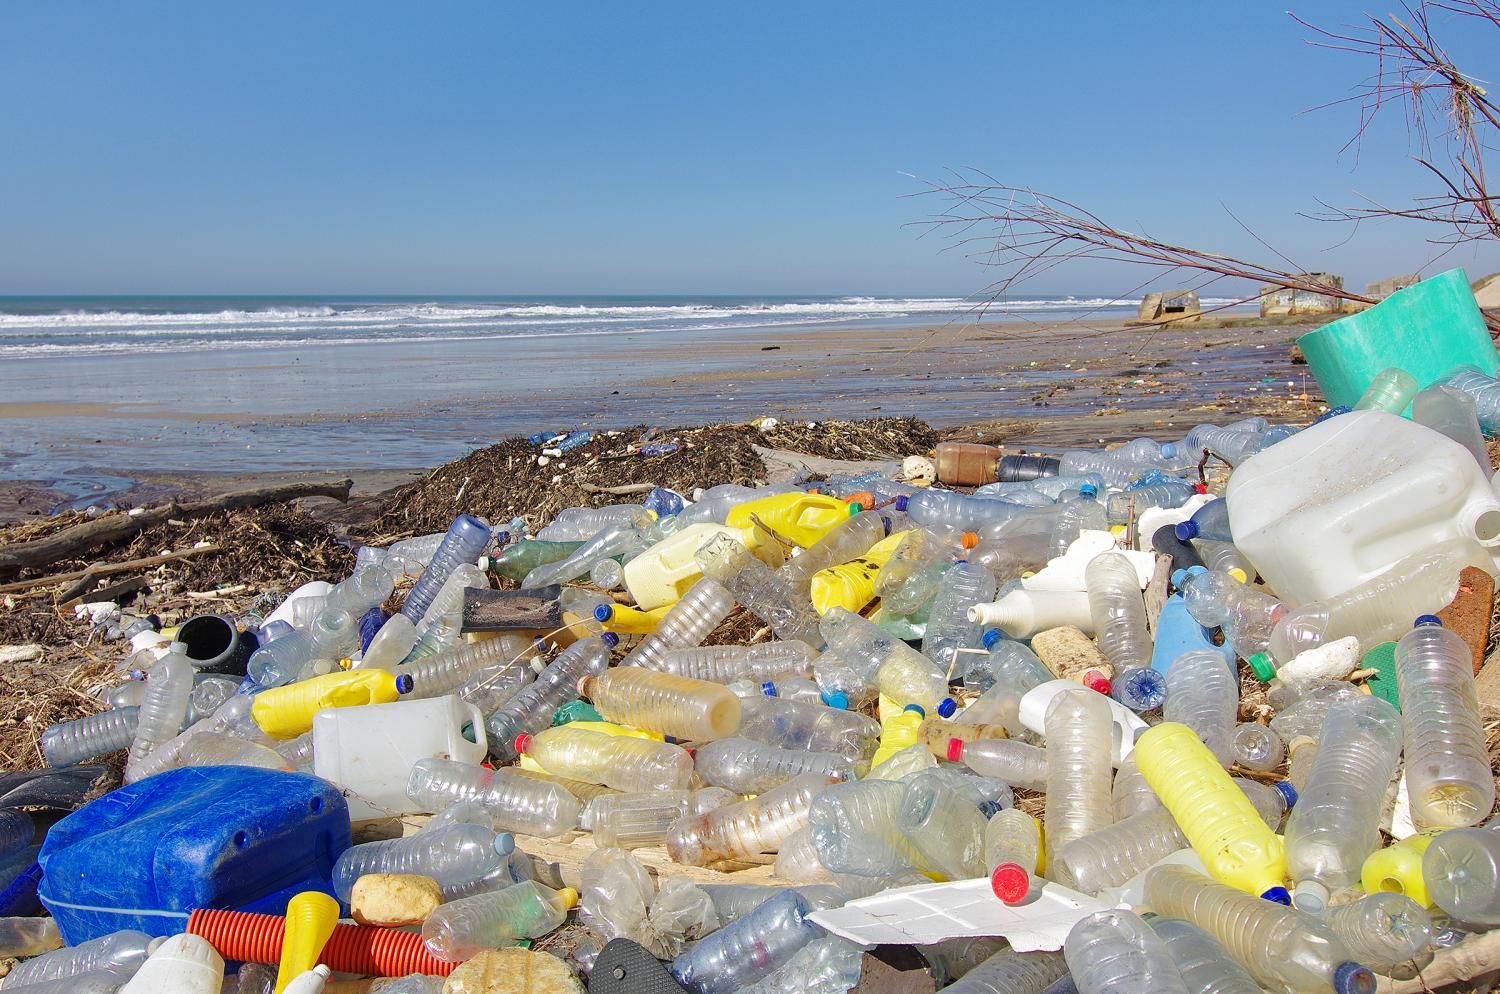 The ultimate solution to plastic pollution is to generate less of it. In the meantime, Purdue University researchers are working on new ways to recycle it into fuel.